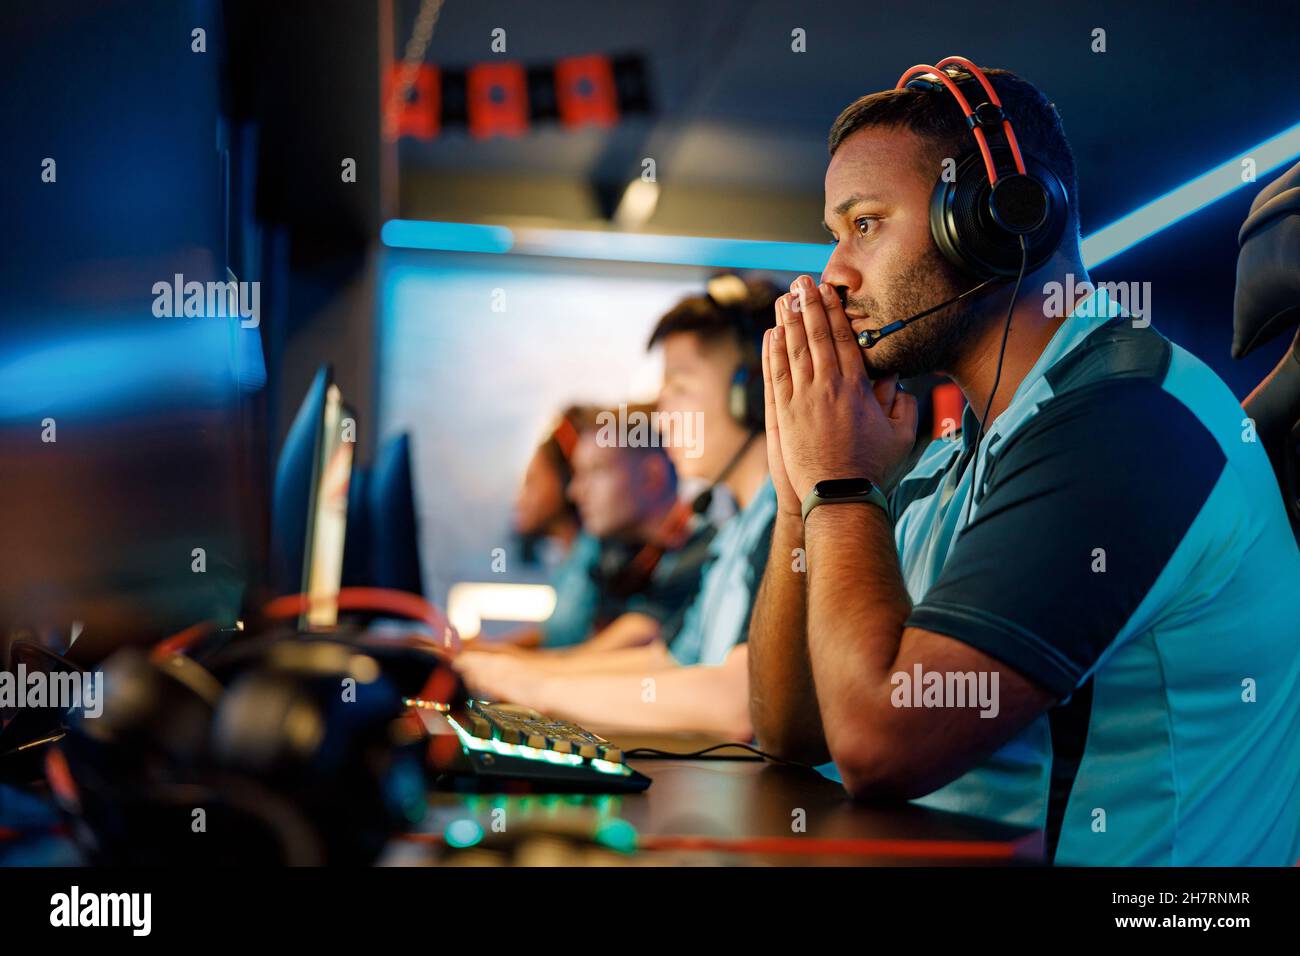 Professional player playing important match in cyber club Stock Photo